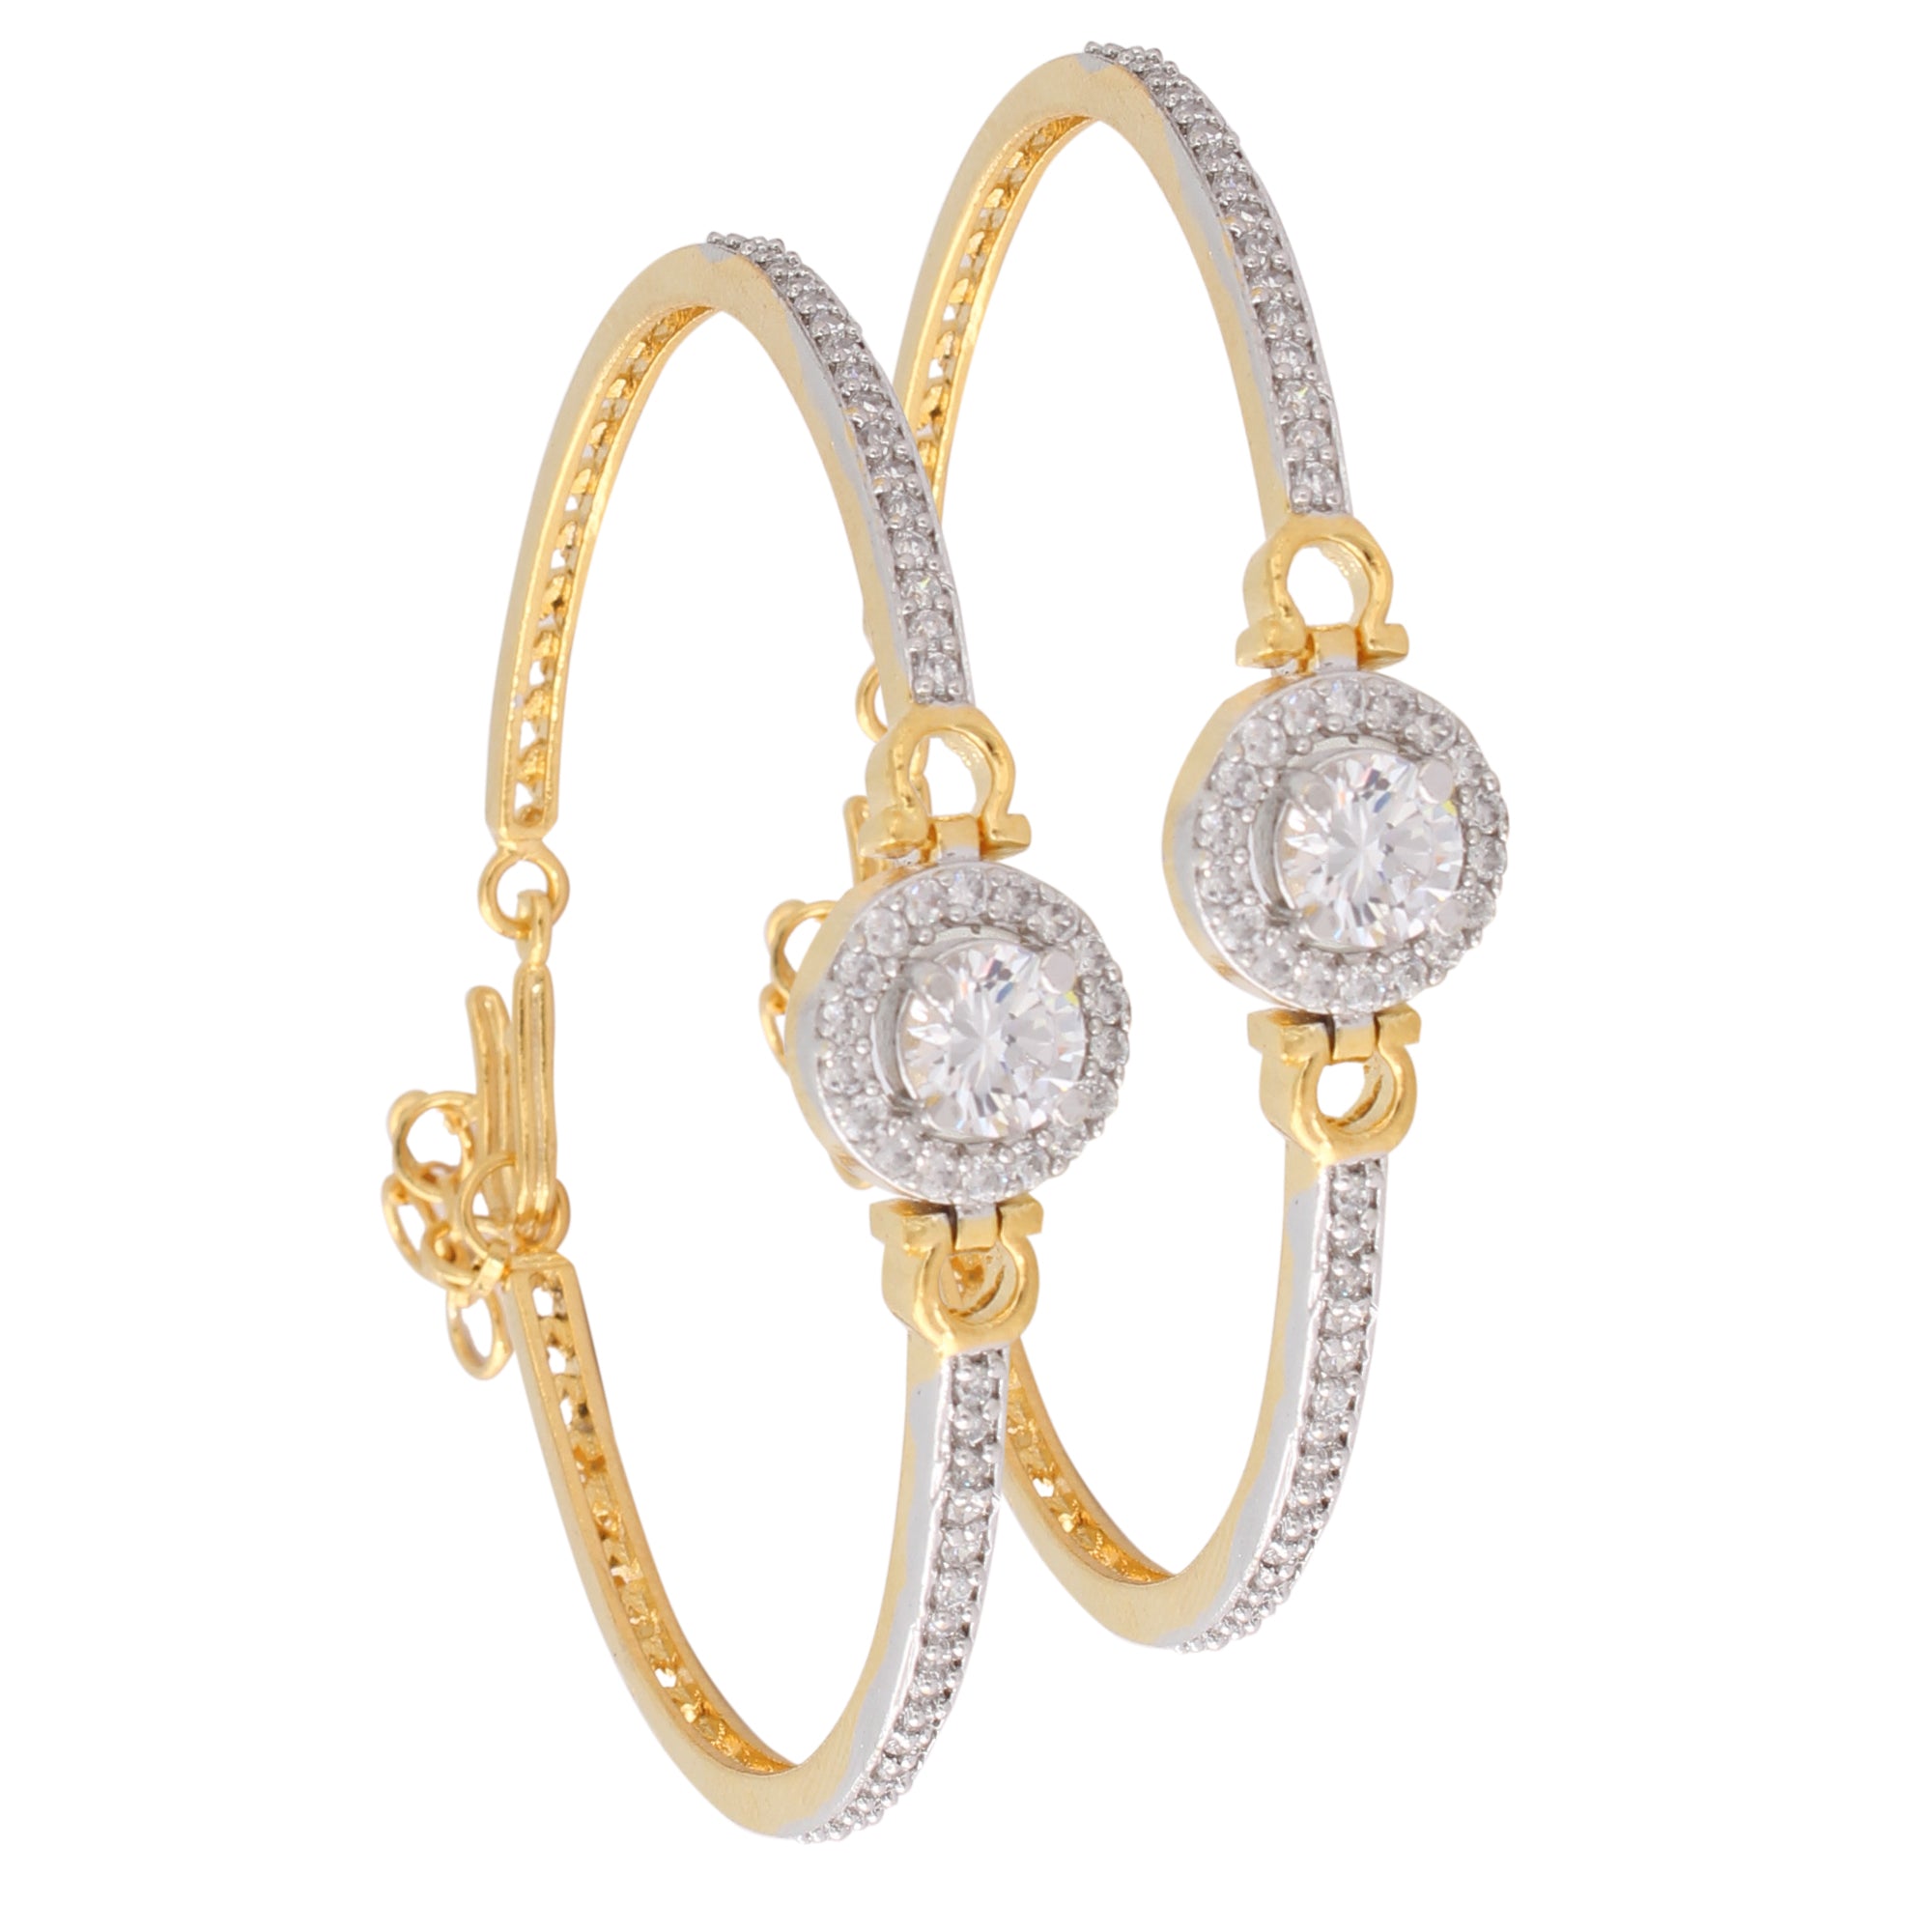 Indian Jewellery from Meira Jewellery:Bracelet,Meira Jewellery Bracelet with  CZ diamond Solitaire in Pave Setting for Women